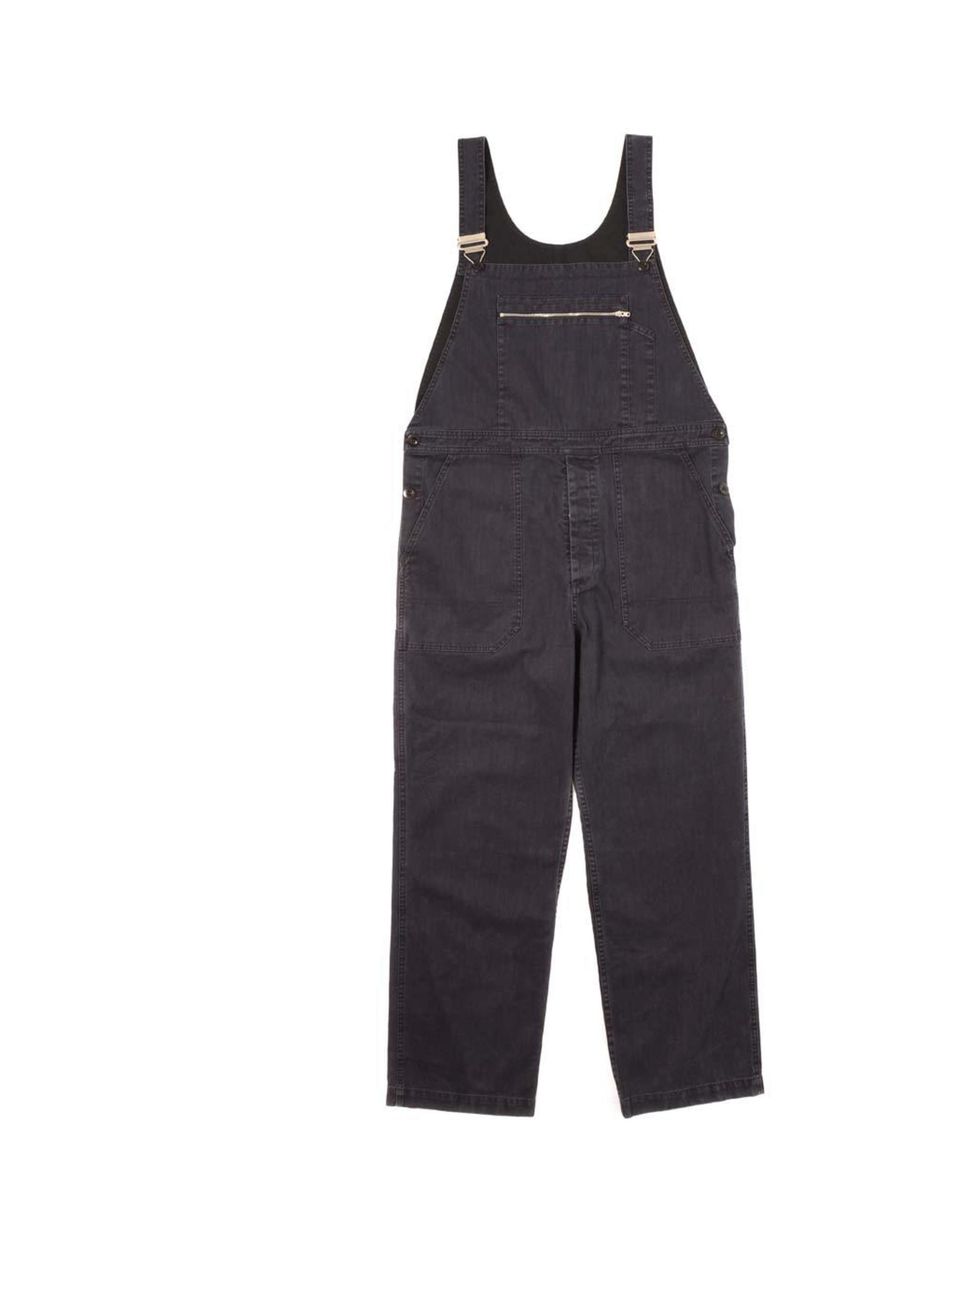 <p>Navy twill dungarees £285 <a href="http://www.margarethowell.co.uk/women/trousers/mhl-dungarees-indigo-twill-indigo">Margaret Howell</a> </p>